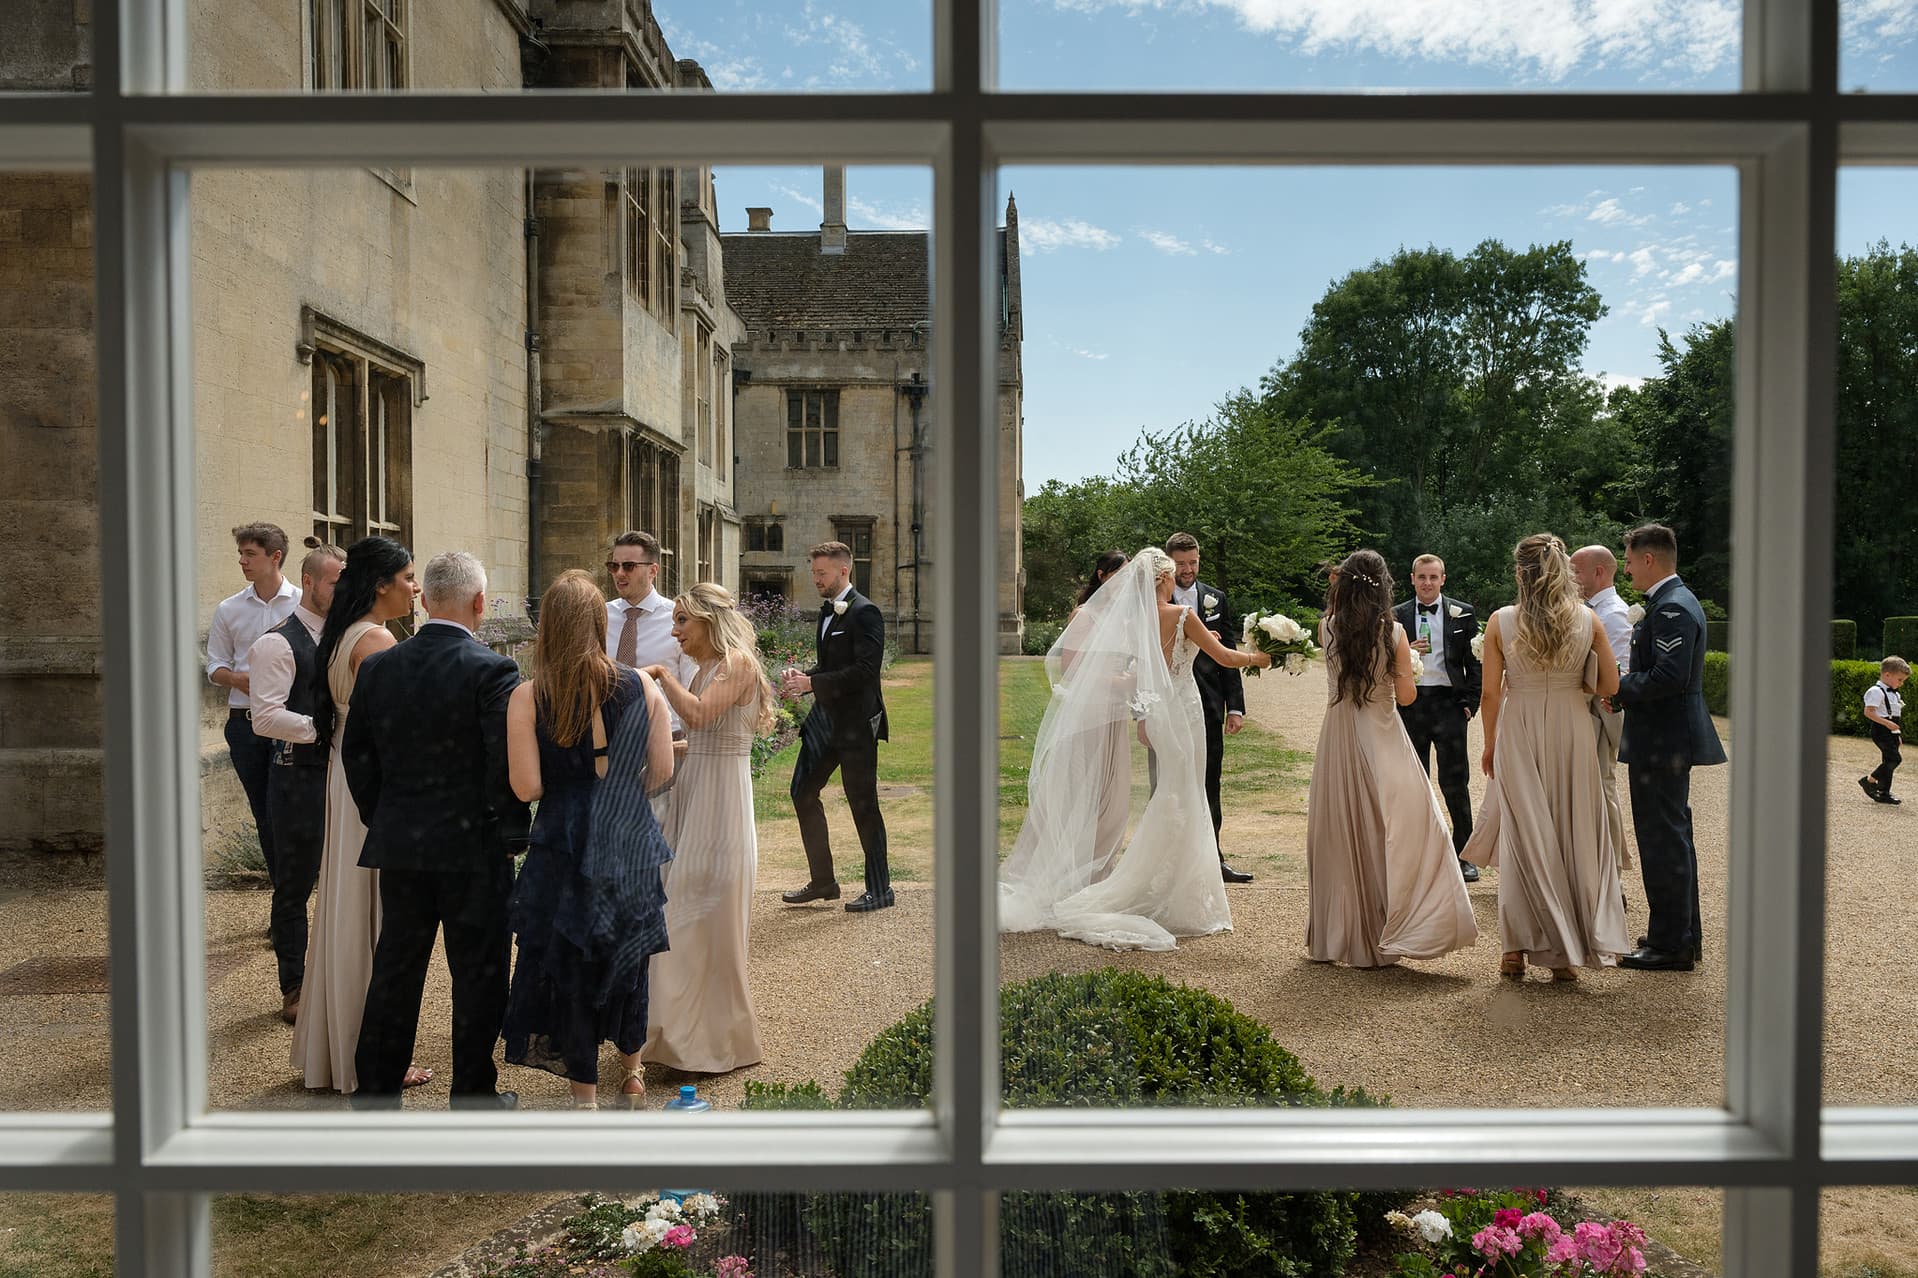 View of wedding drinks reception through panes of glass in an orangery window